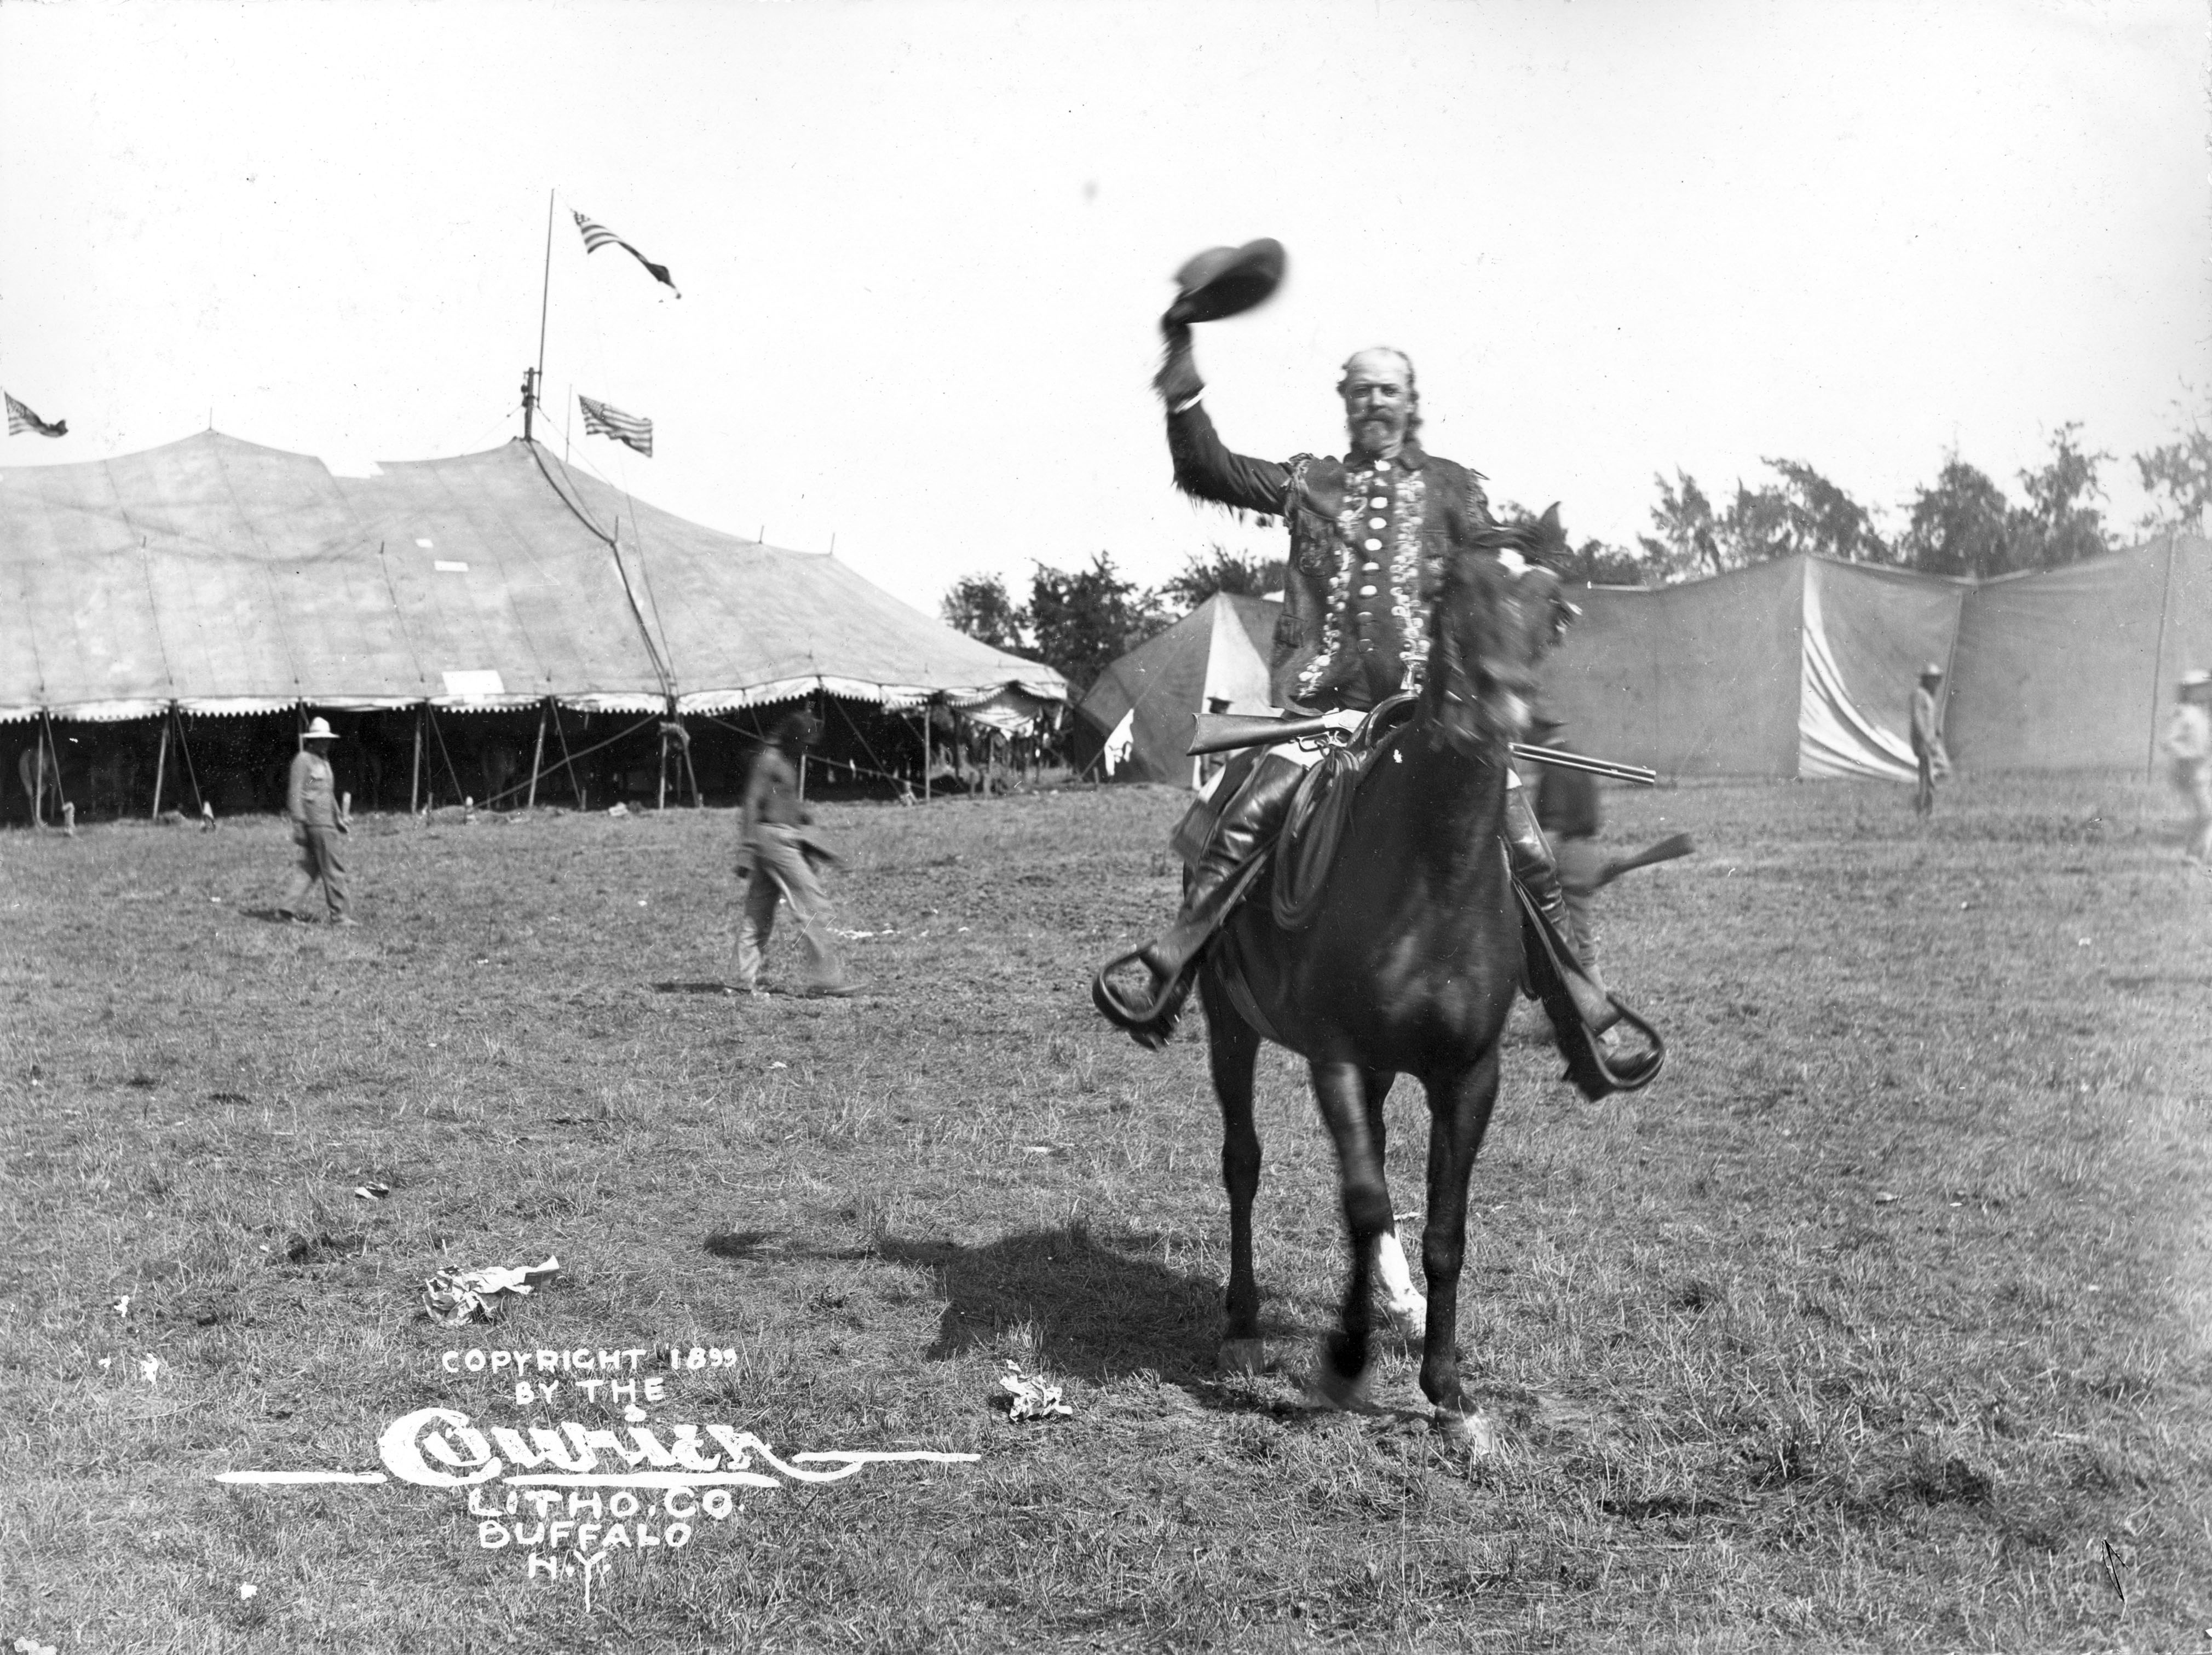 Buffalo Bill waves his hat while on horseback, 1899 [NS-543, Courtesy Denver Public Library Western History Department]